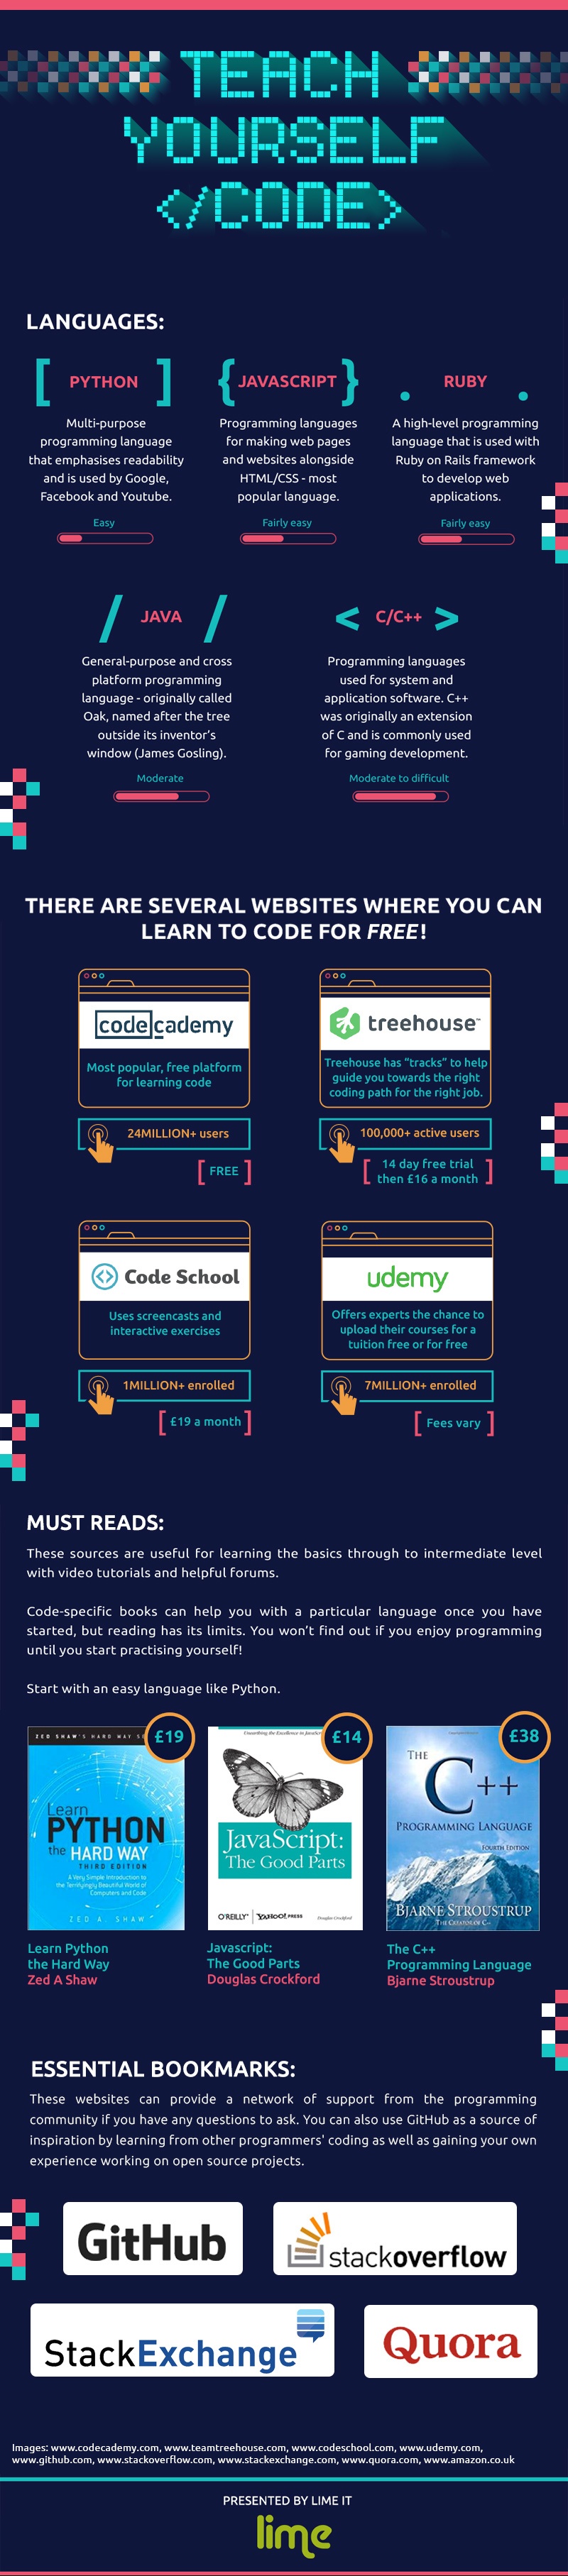 How to Teach Yourself Code Infographic